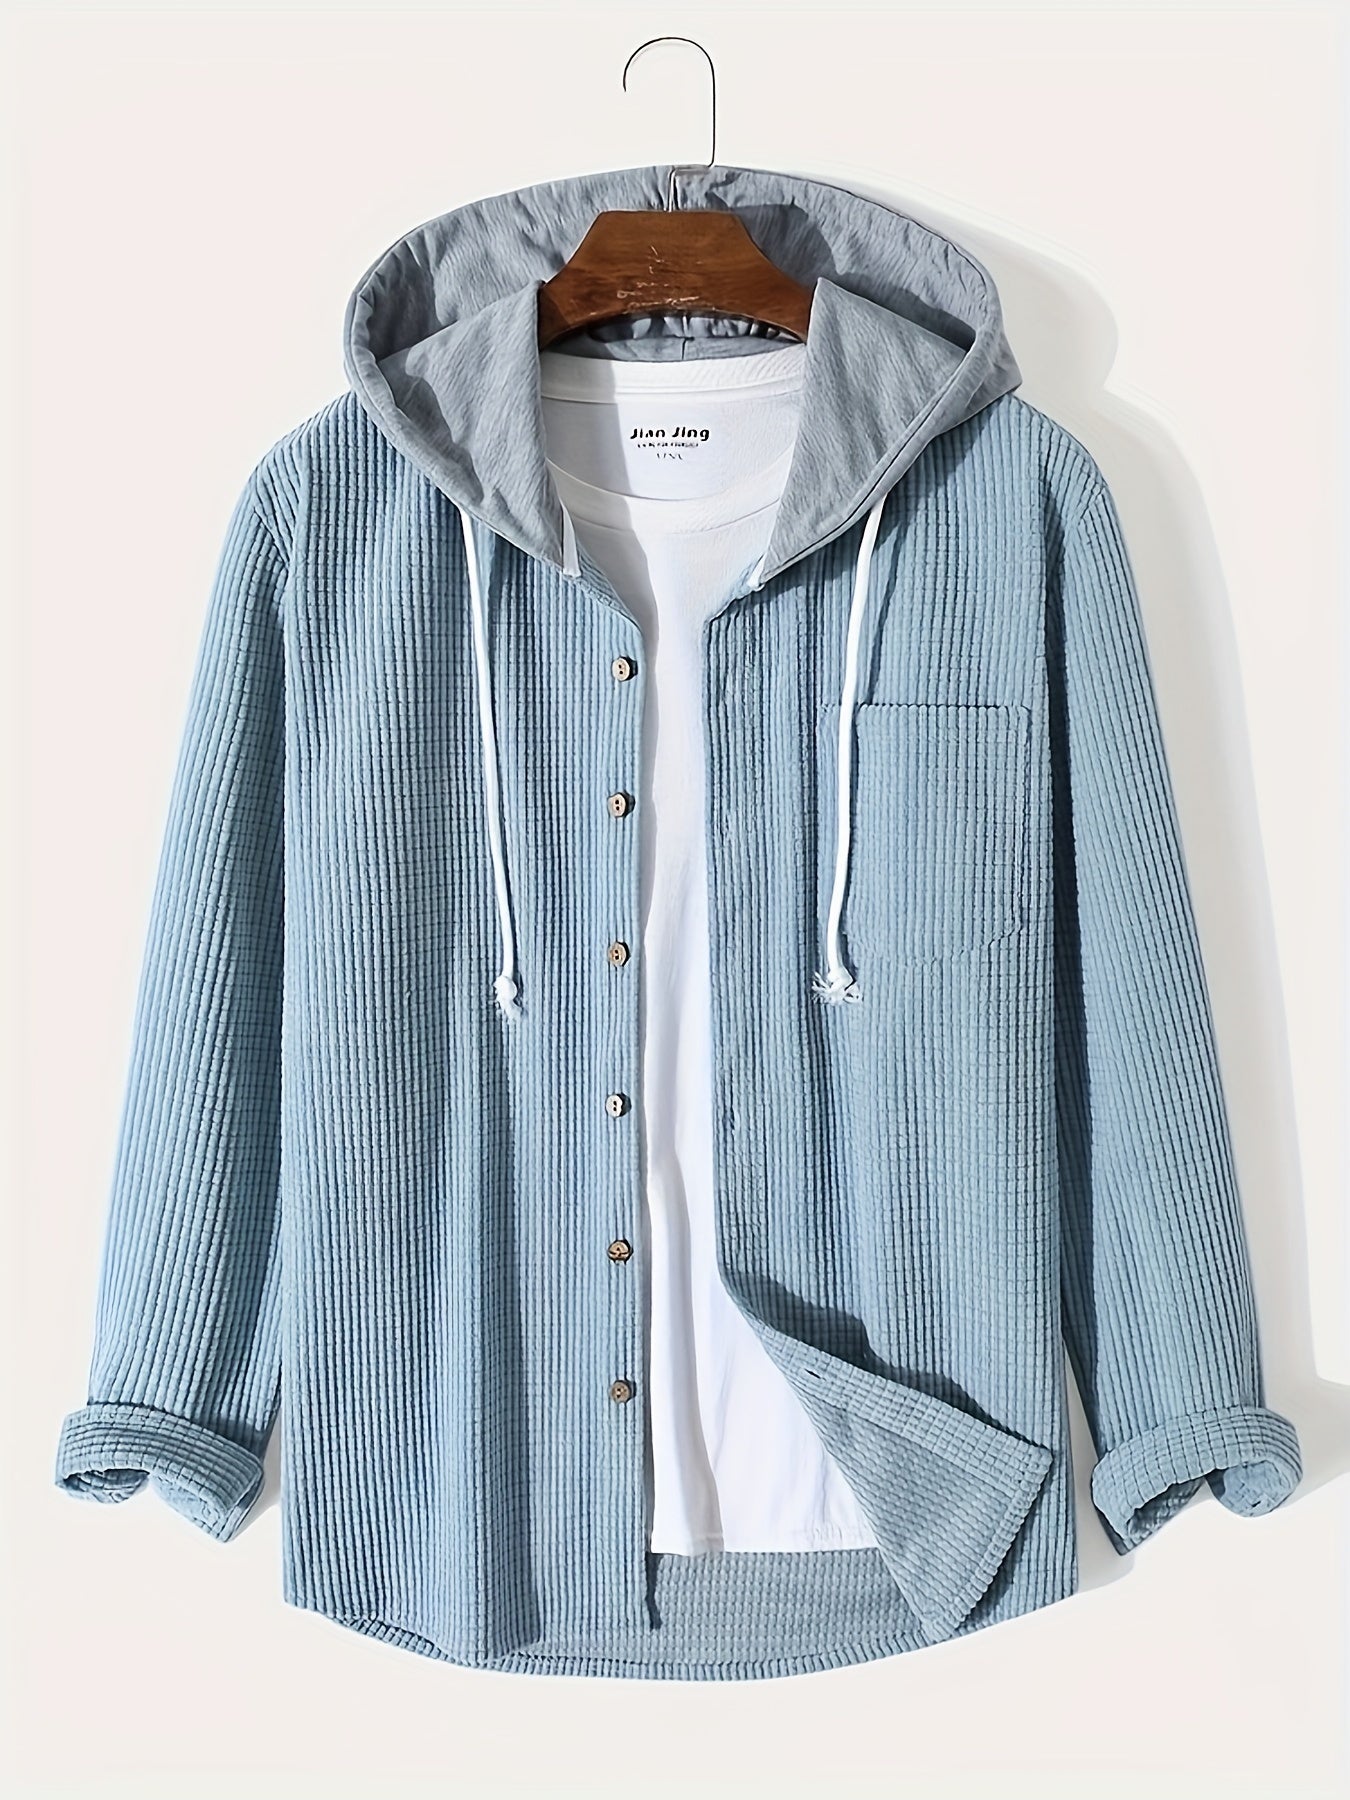 Antmvs Waffle Pattern Hoodie Shirt Coat For Men Long Sleeve Casual Regular Fit Button Up Hooded Shirts Jacket